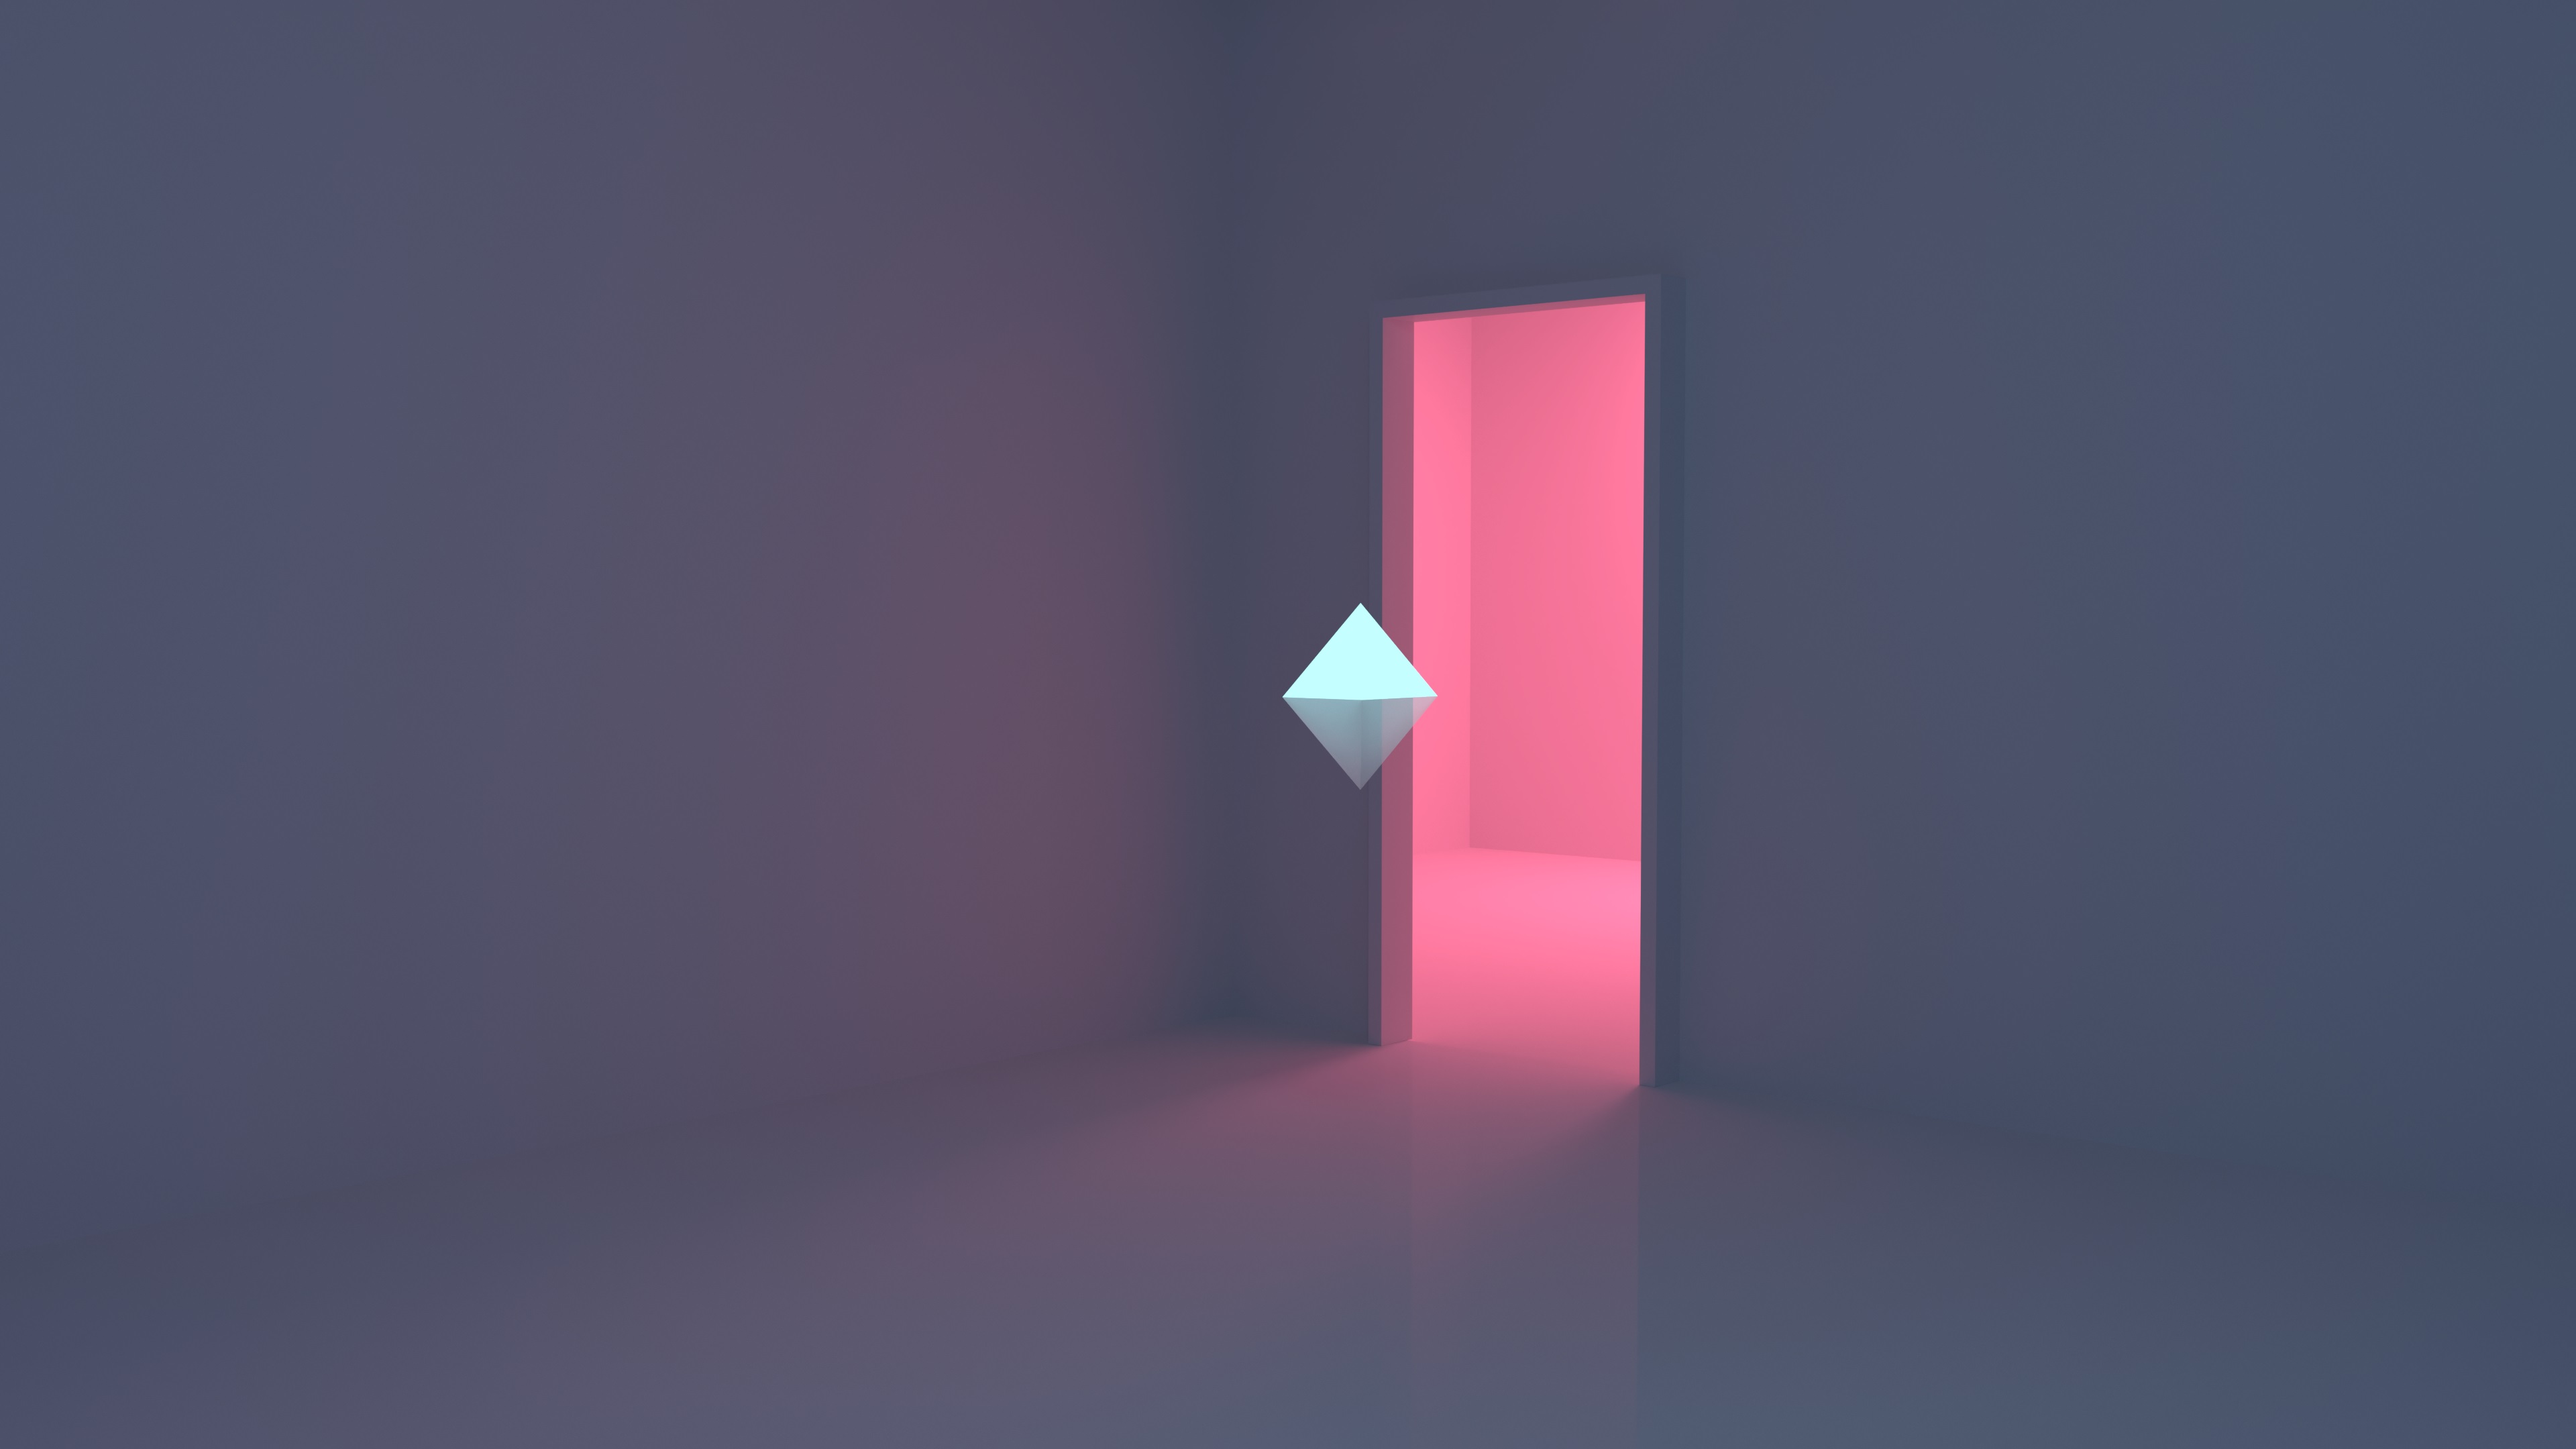 General 3840x2160 minimalism 3D Abstract geometric figures abstract CGI